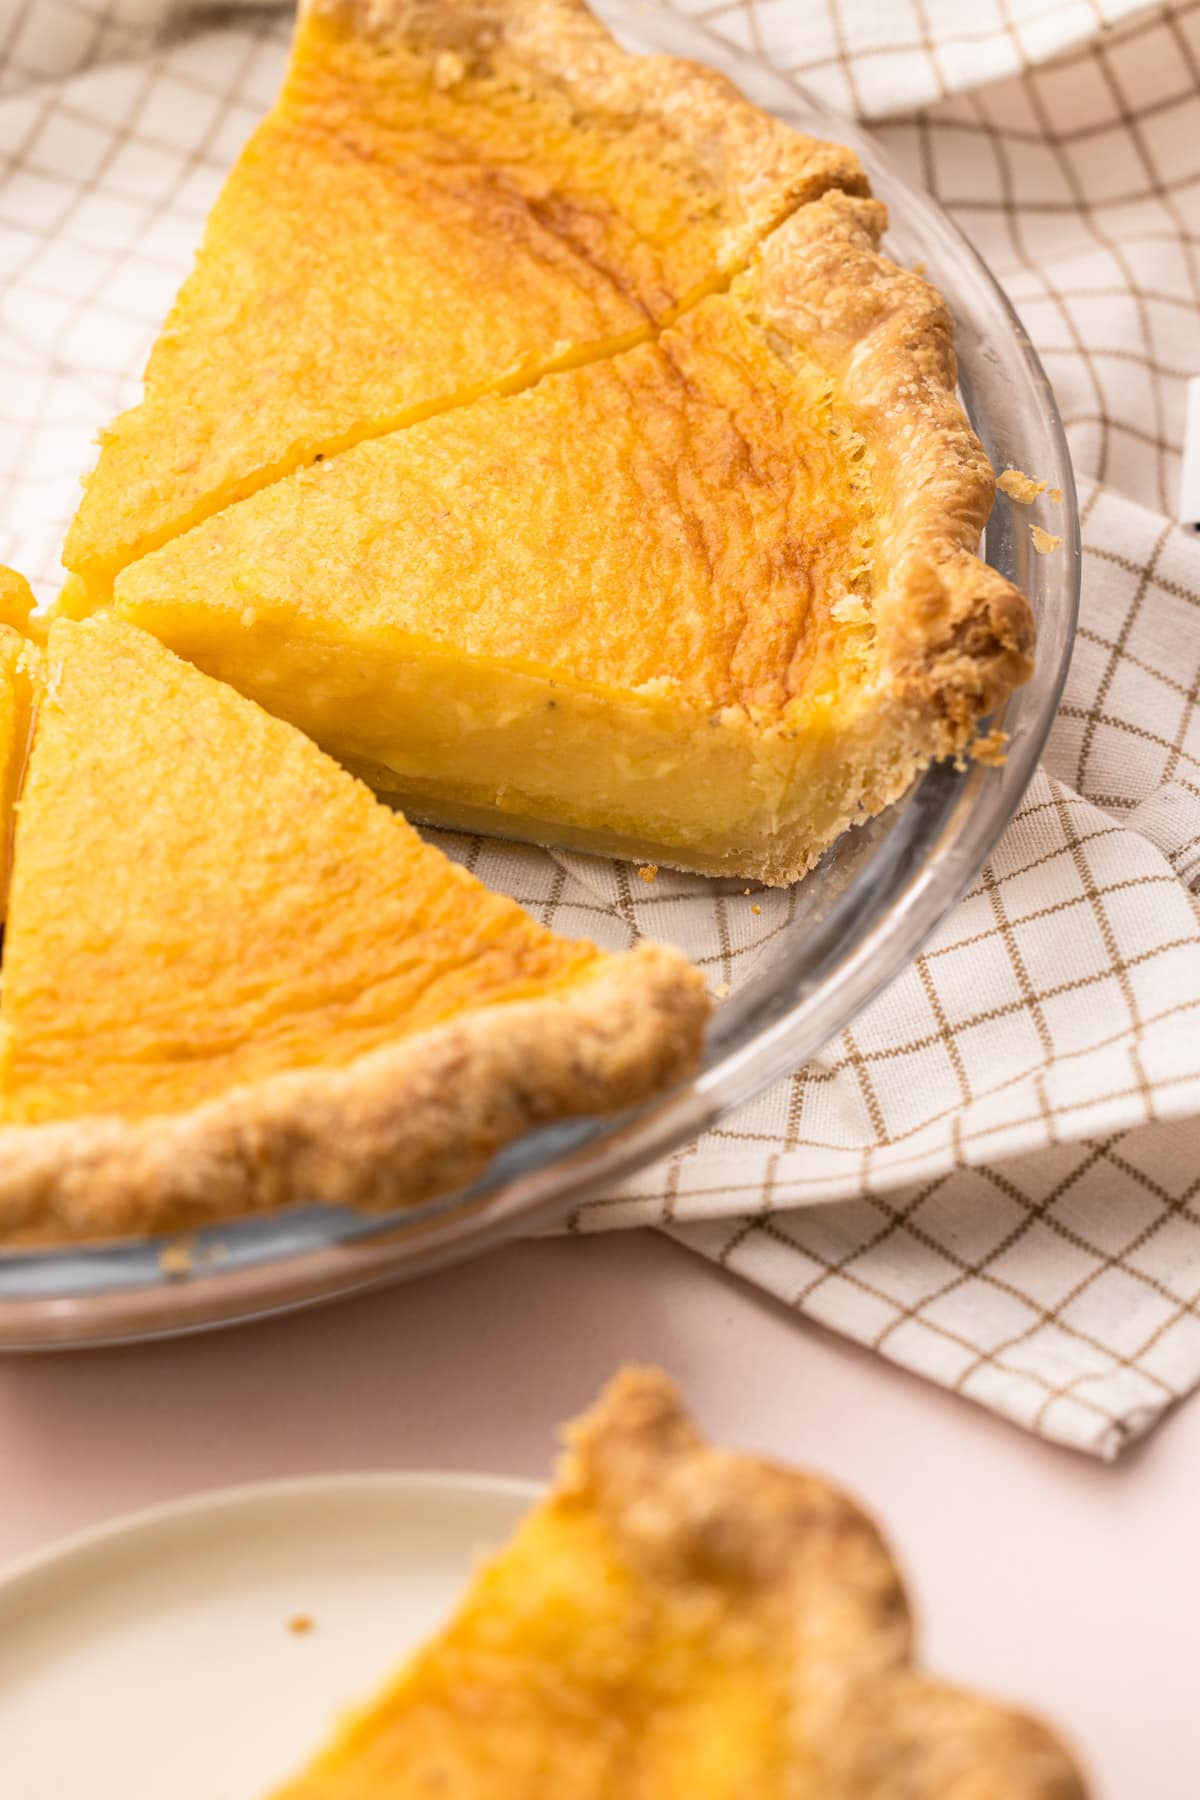 A baked chess pie made with a pate sucree pastry.